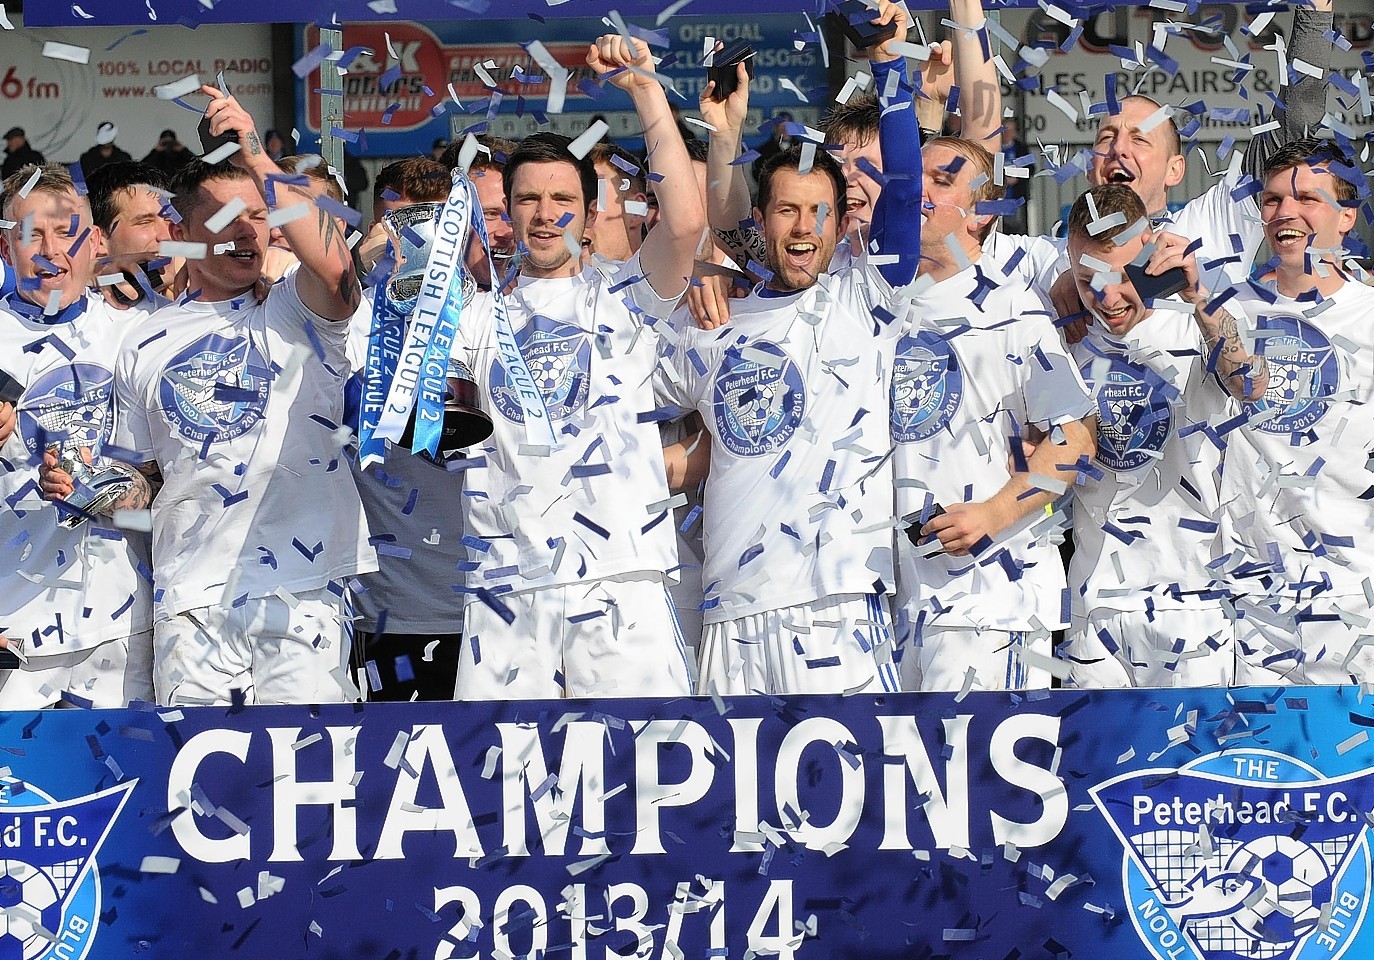 Peterhead celebrated claiming the Scottish League Two title two years ago.